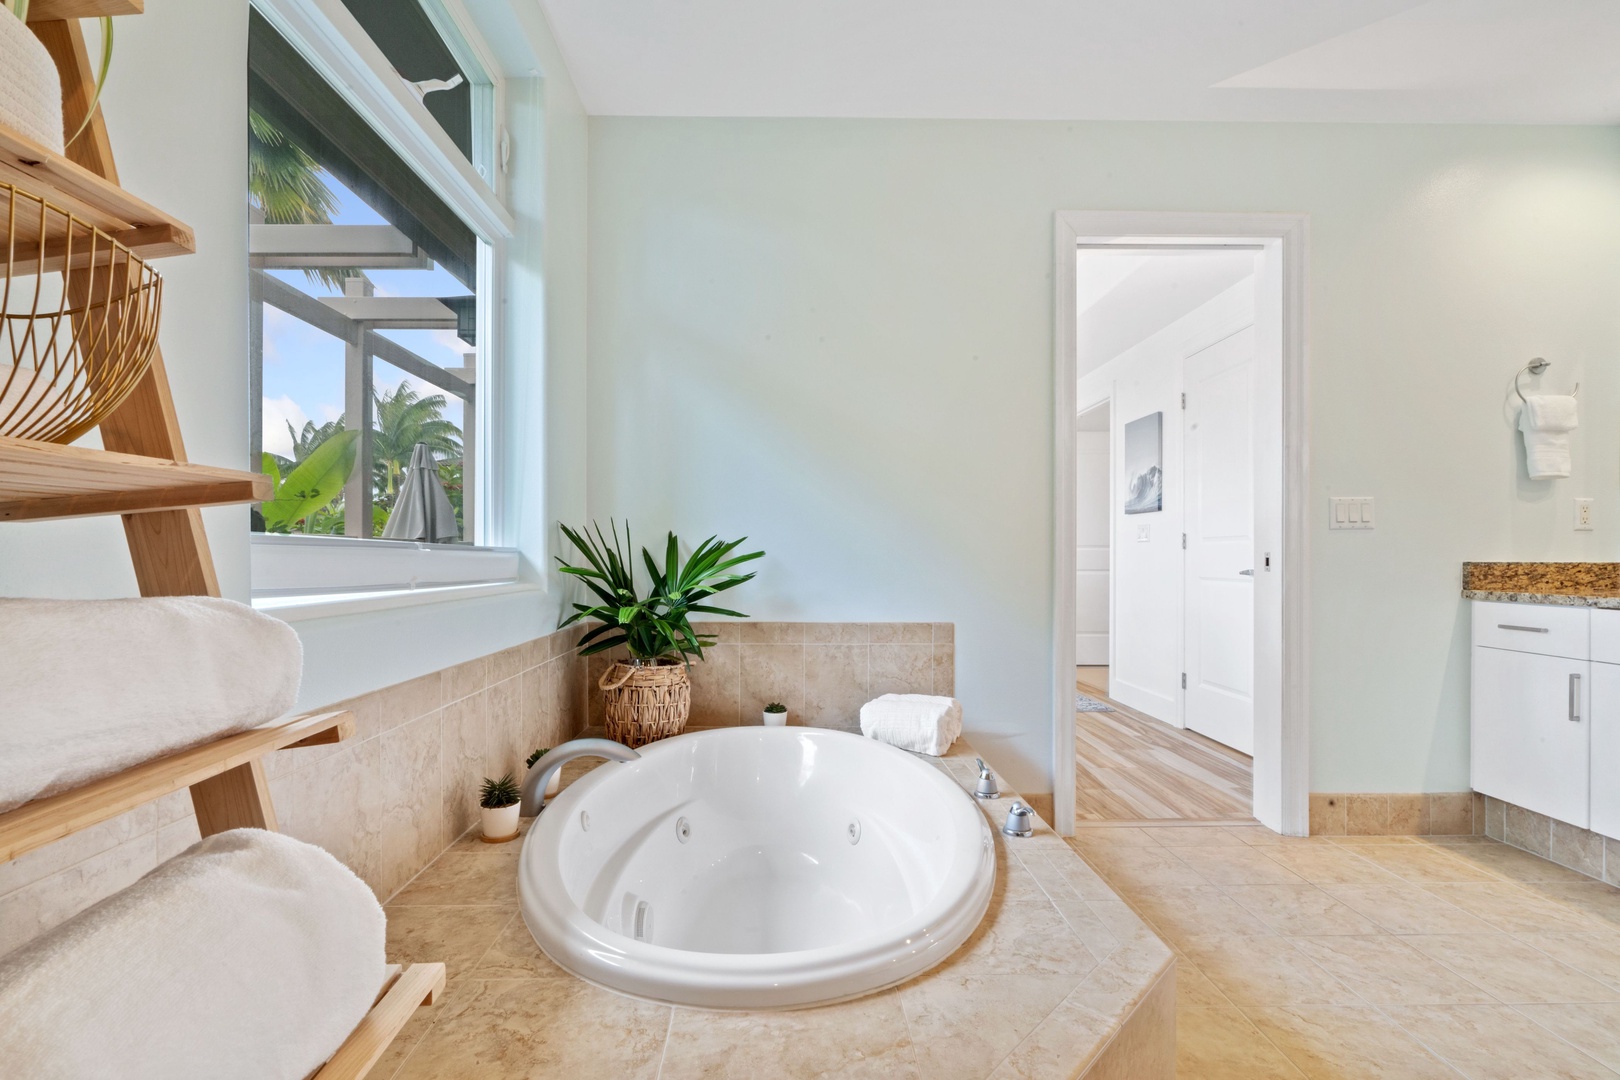 Princeville Vacation Rentals, Tropical Elegance - Soak in relaxation on the hot tub.